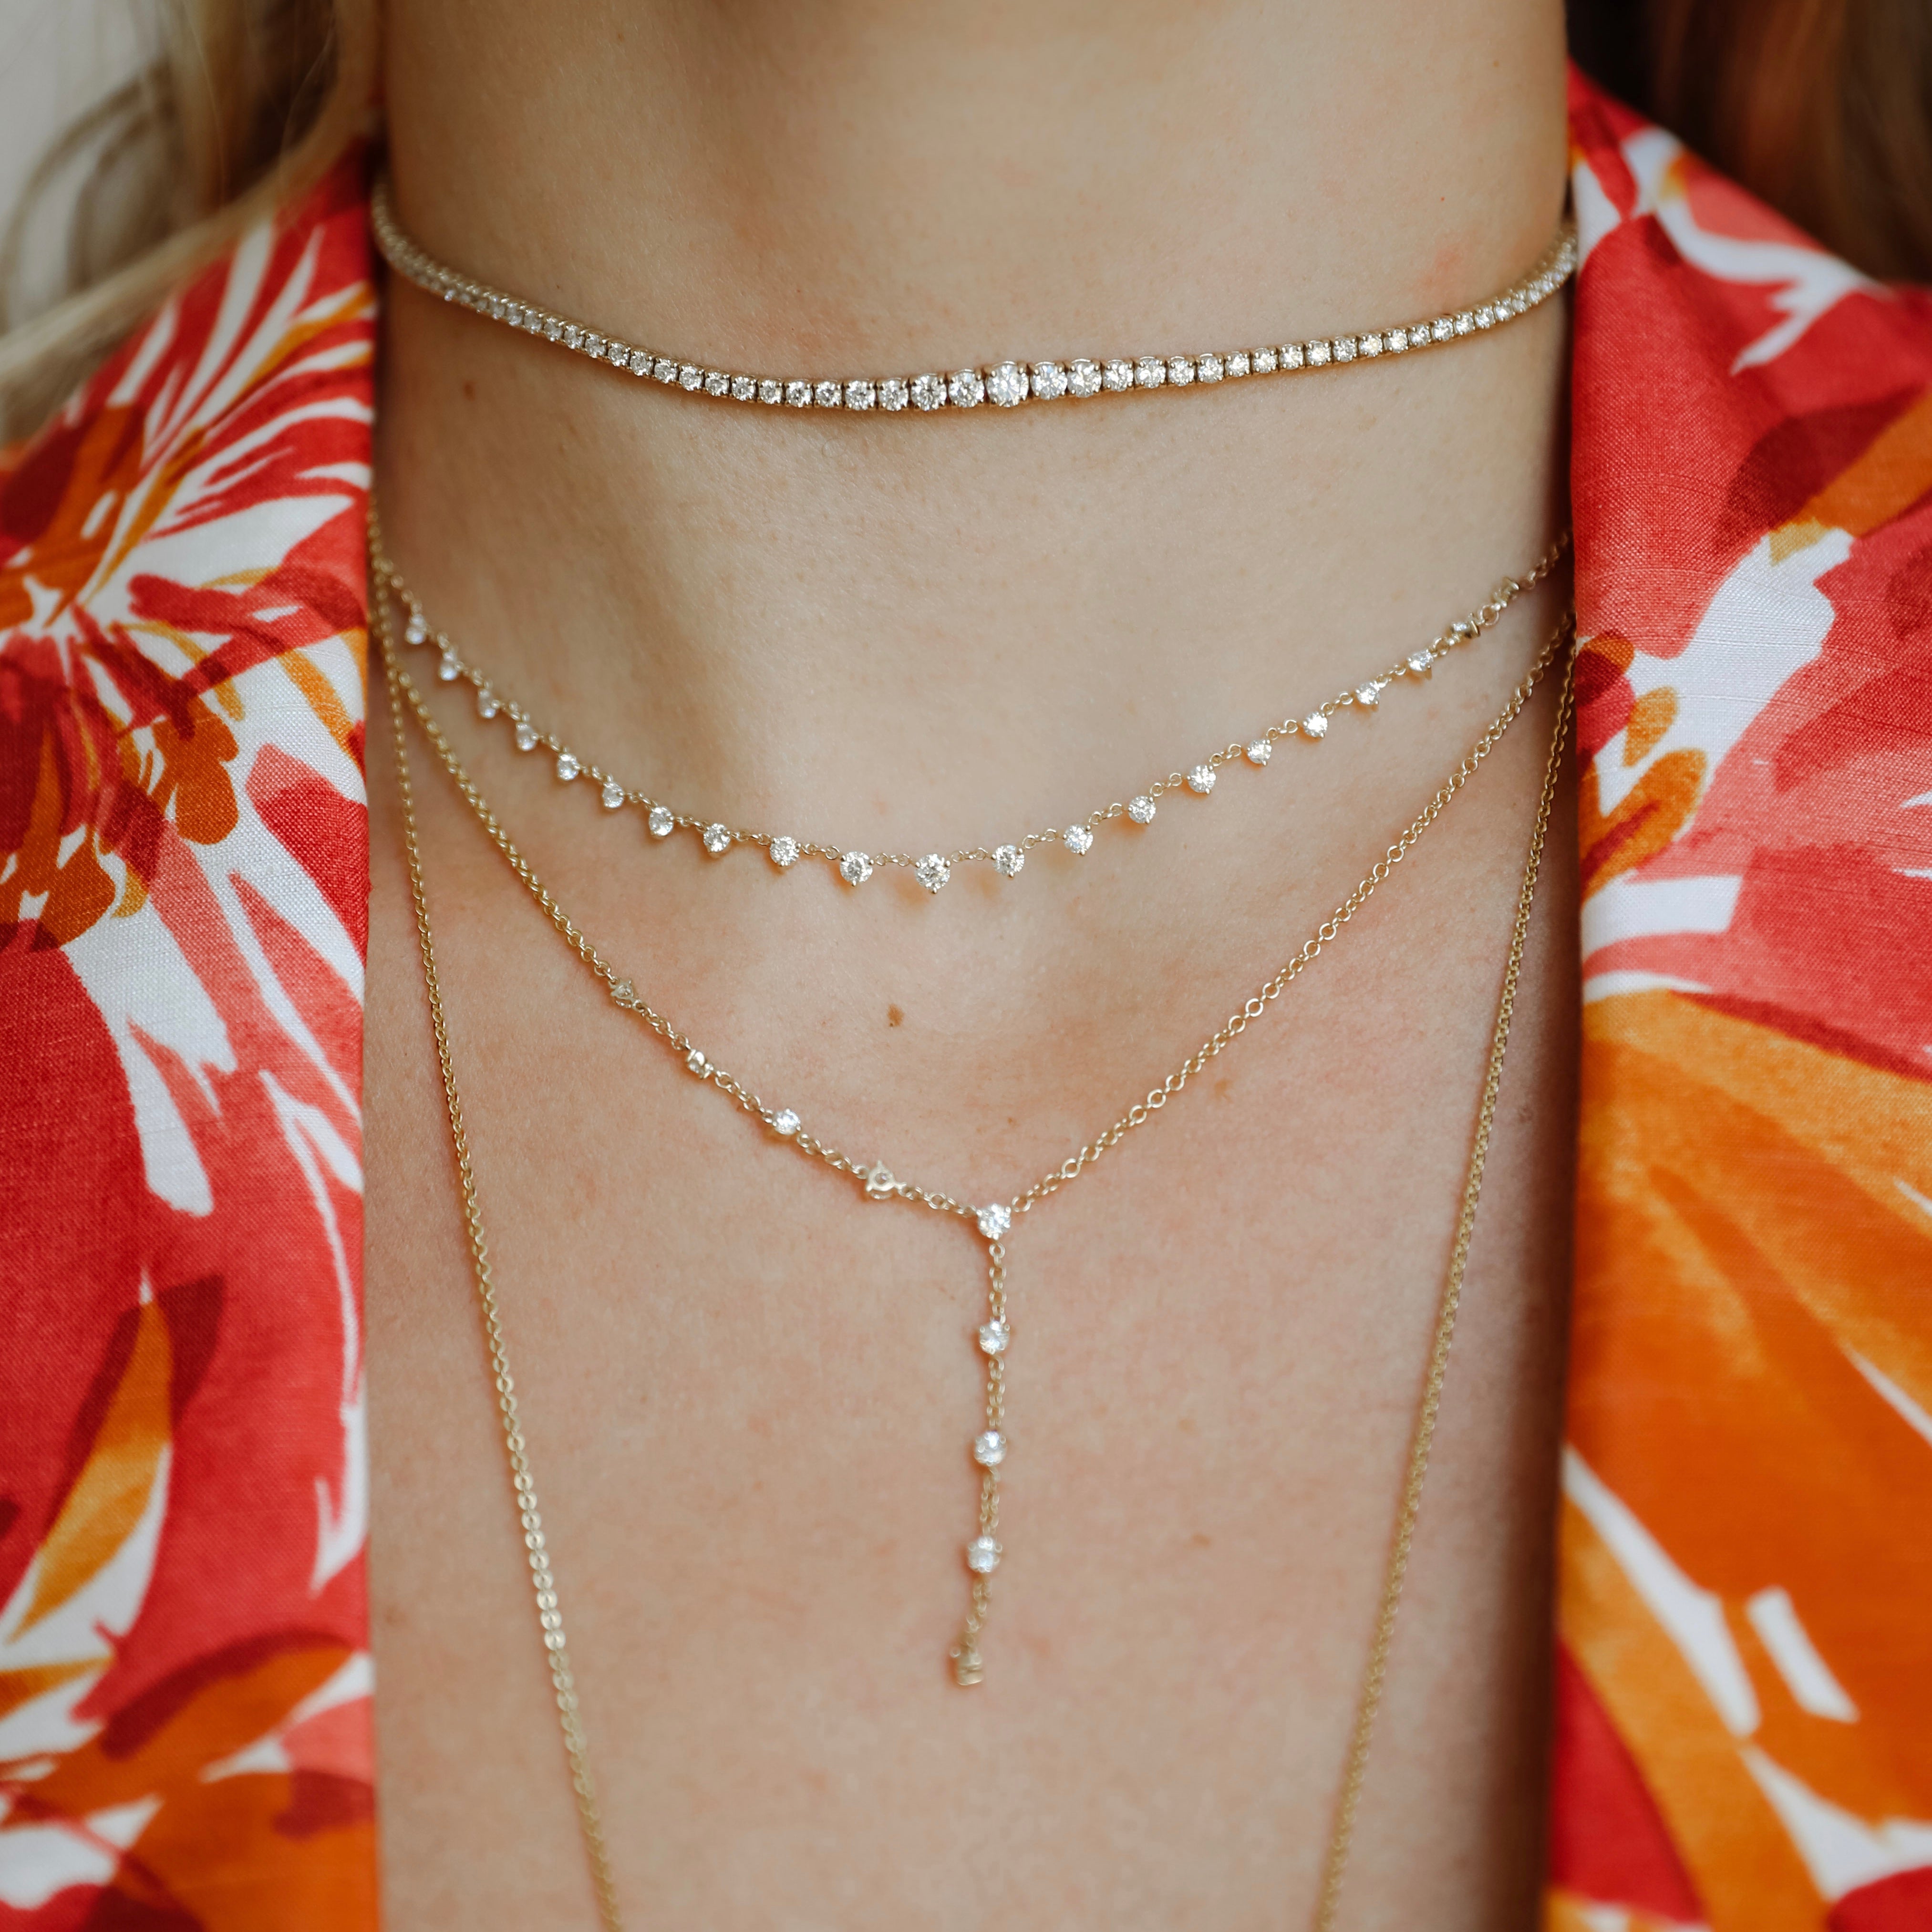 Sparkler Lariat shown layered with the Starstruck Necklace and 3.25 Carat Tennis Choker.